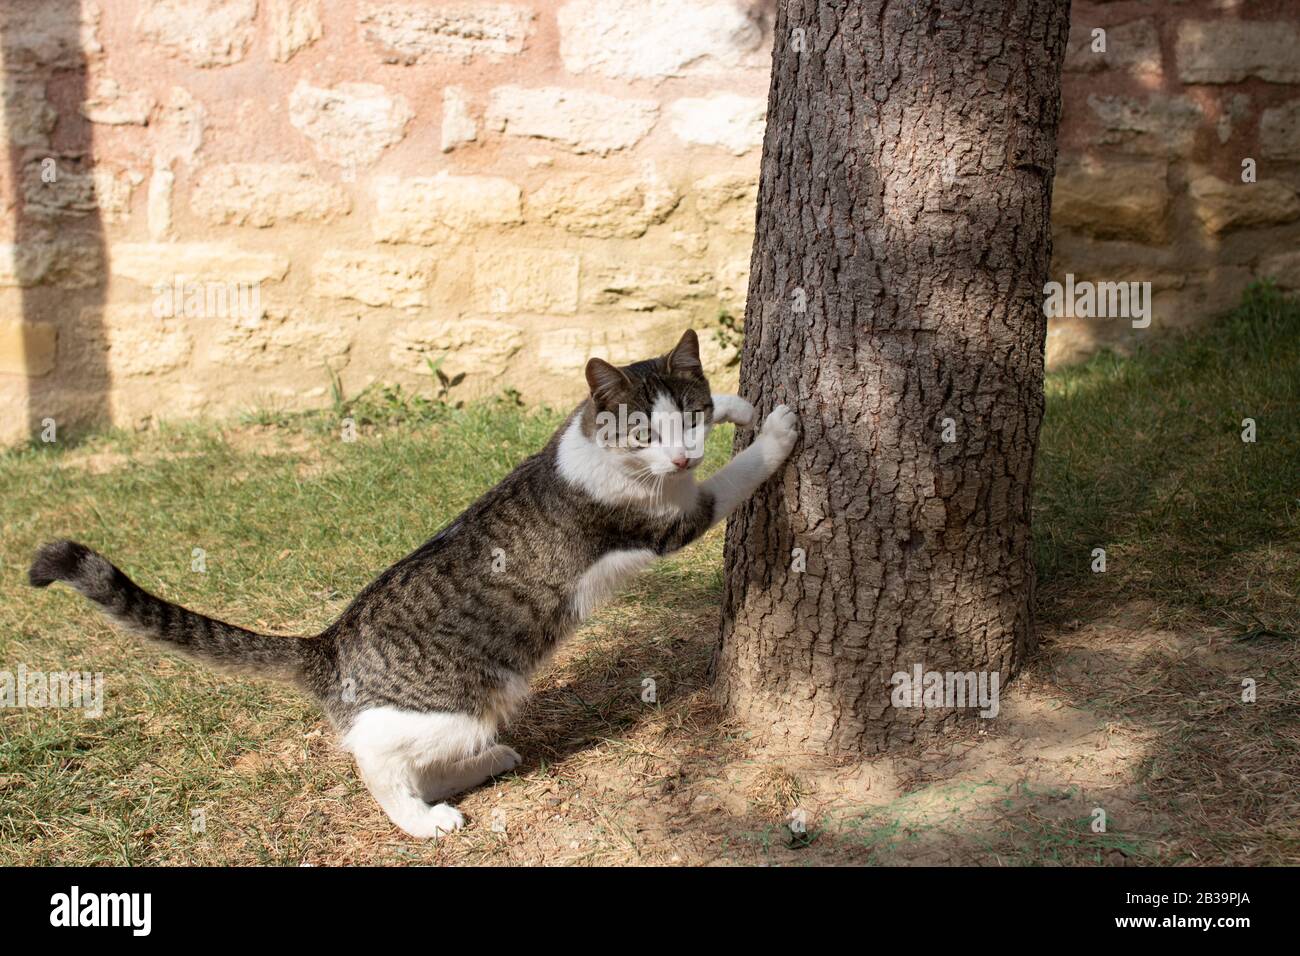 The gray and white cat is angry looking at the camera. Fore legs on the tree. Stock Photo